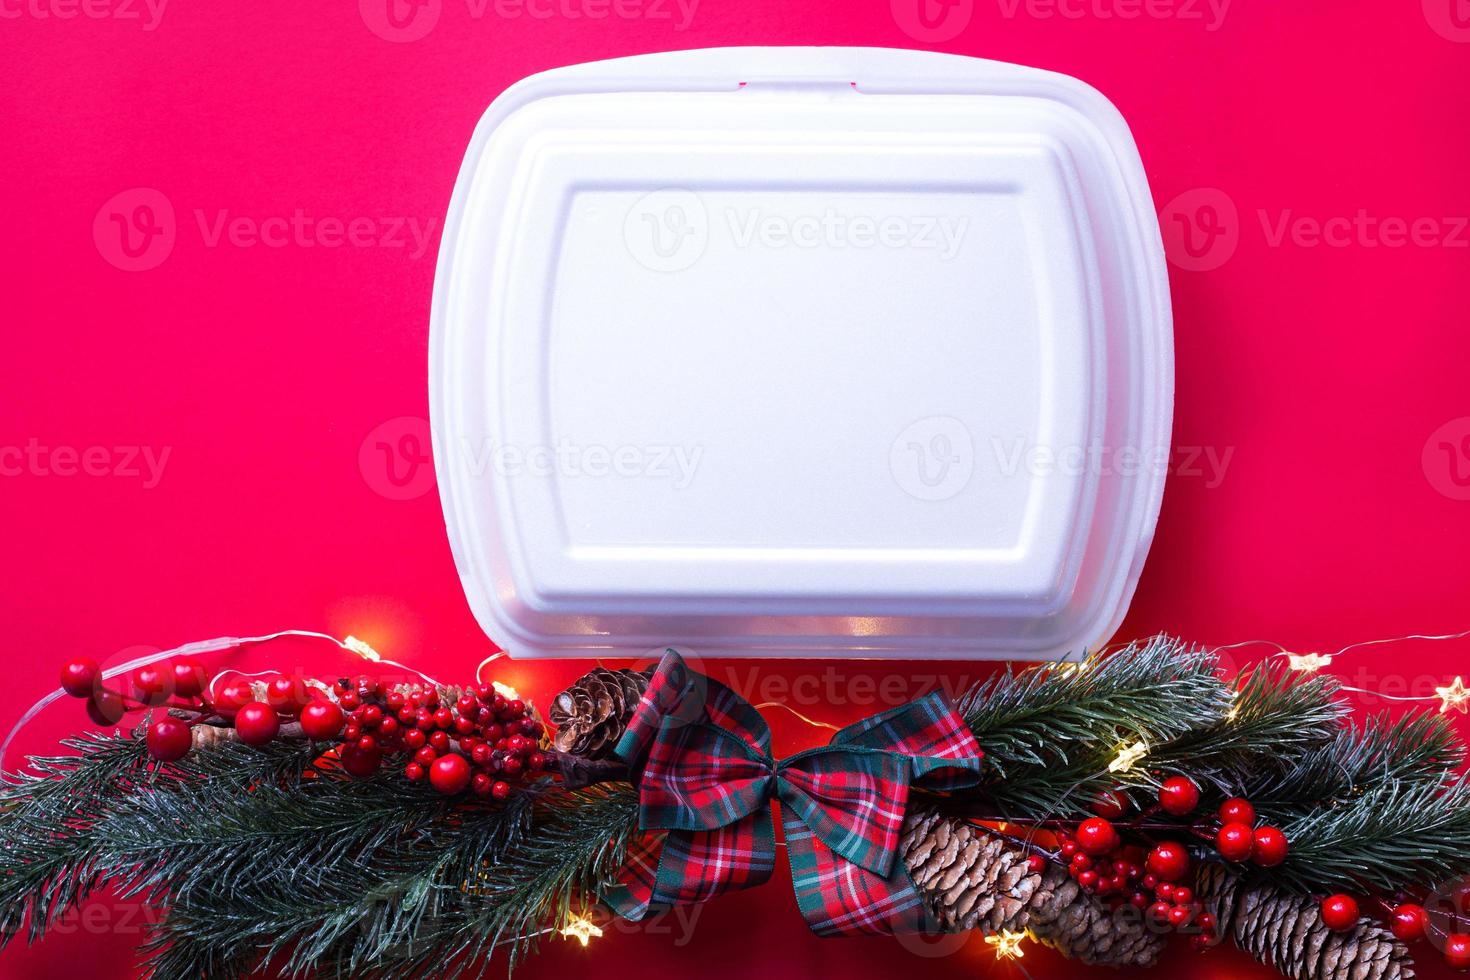 Christmas decor of food delivery service containers. New year's eve promotion. Ready-made hot order, disposable plastic and paper packaging. Work on public holidays catering. Copy space, mock up photo